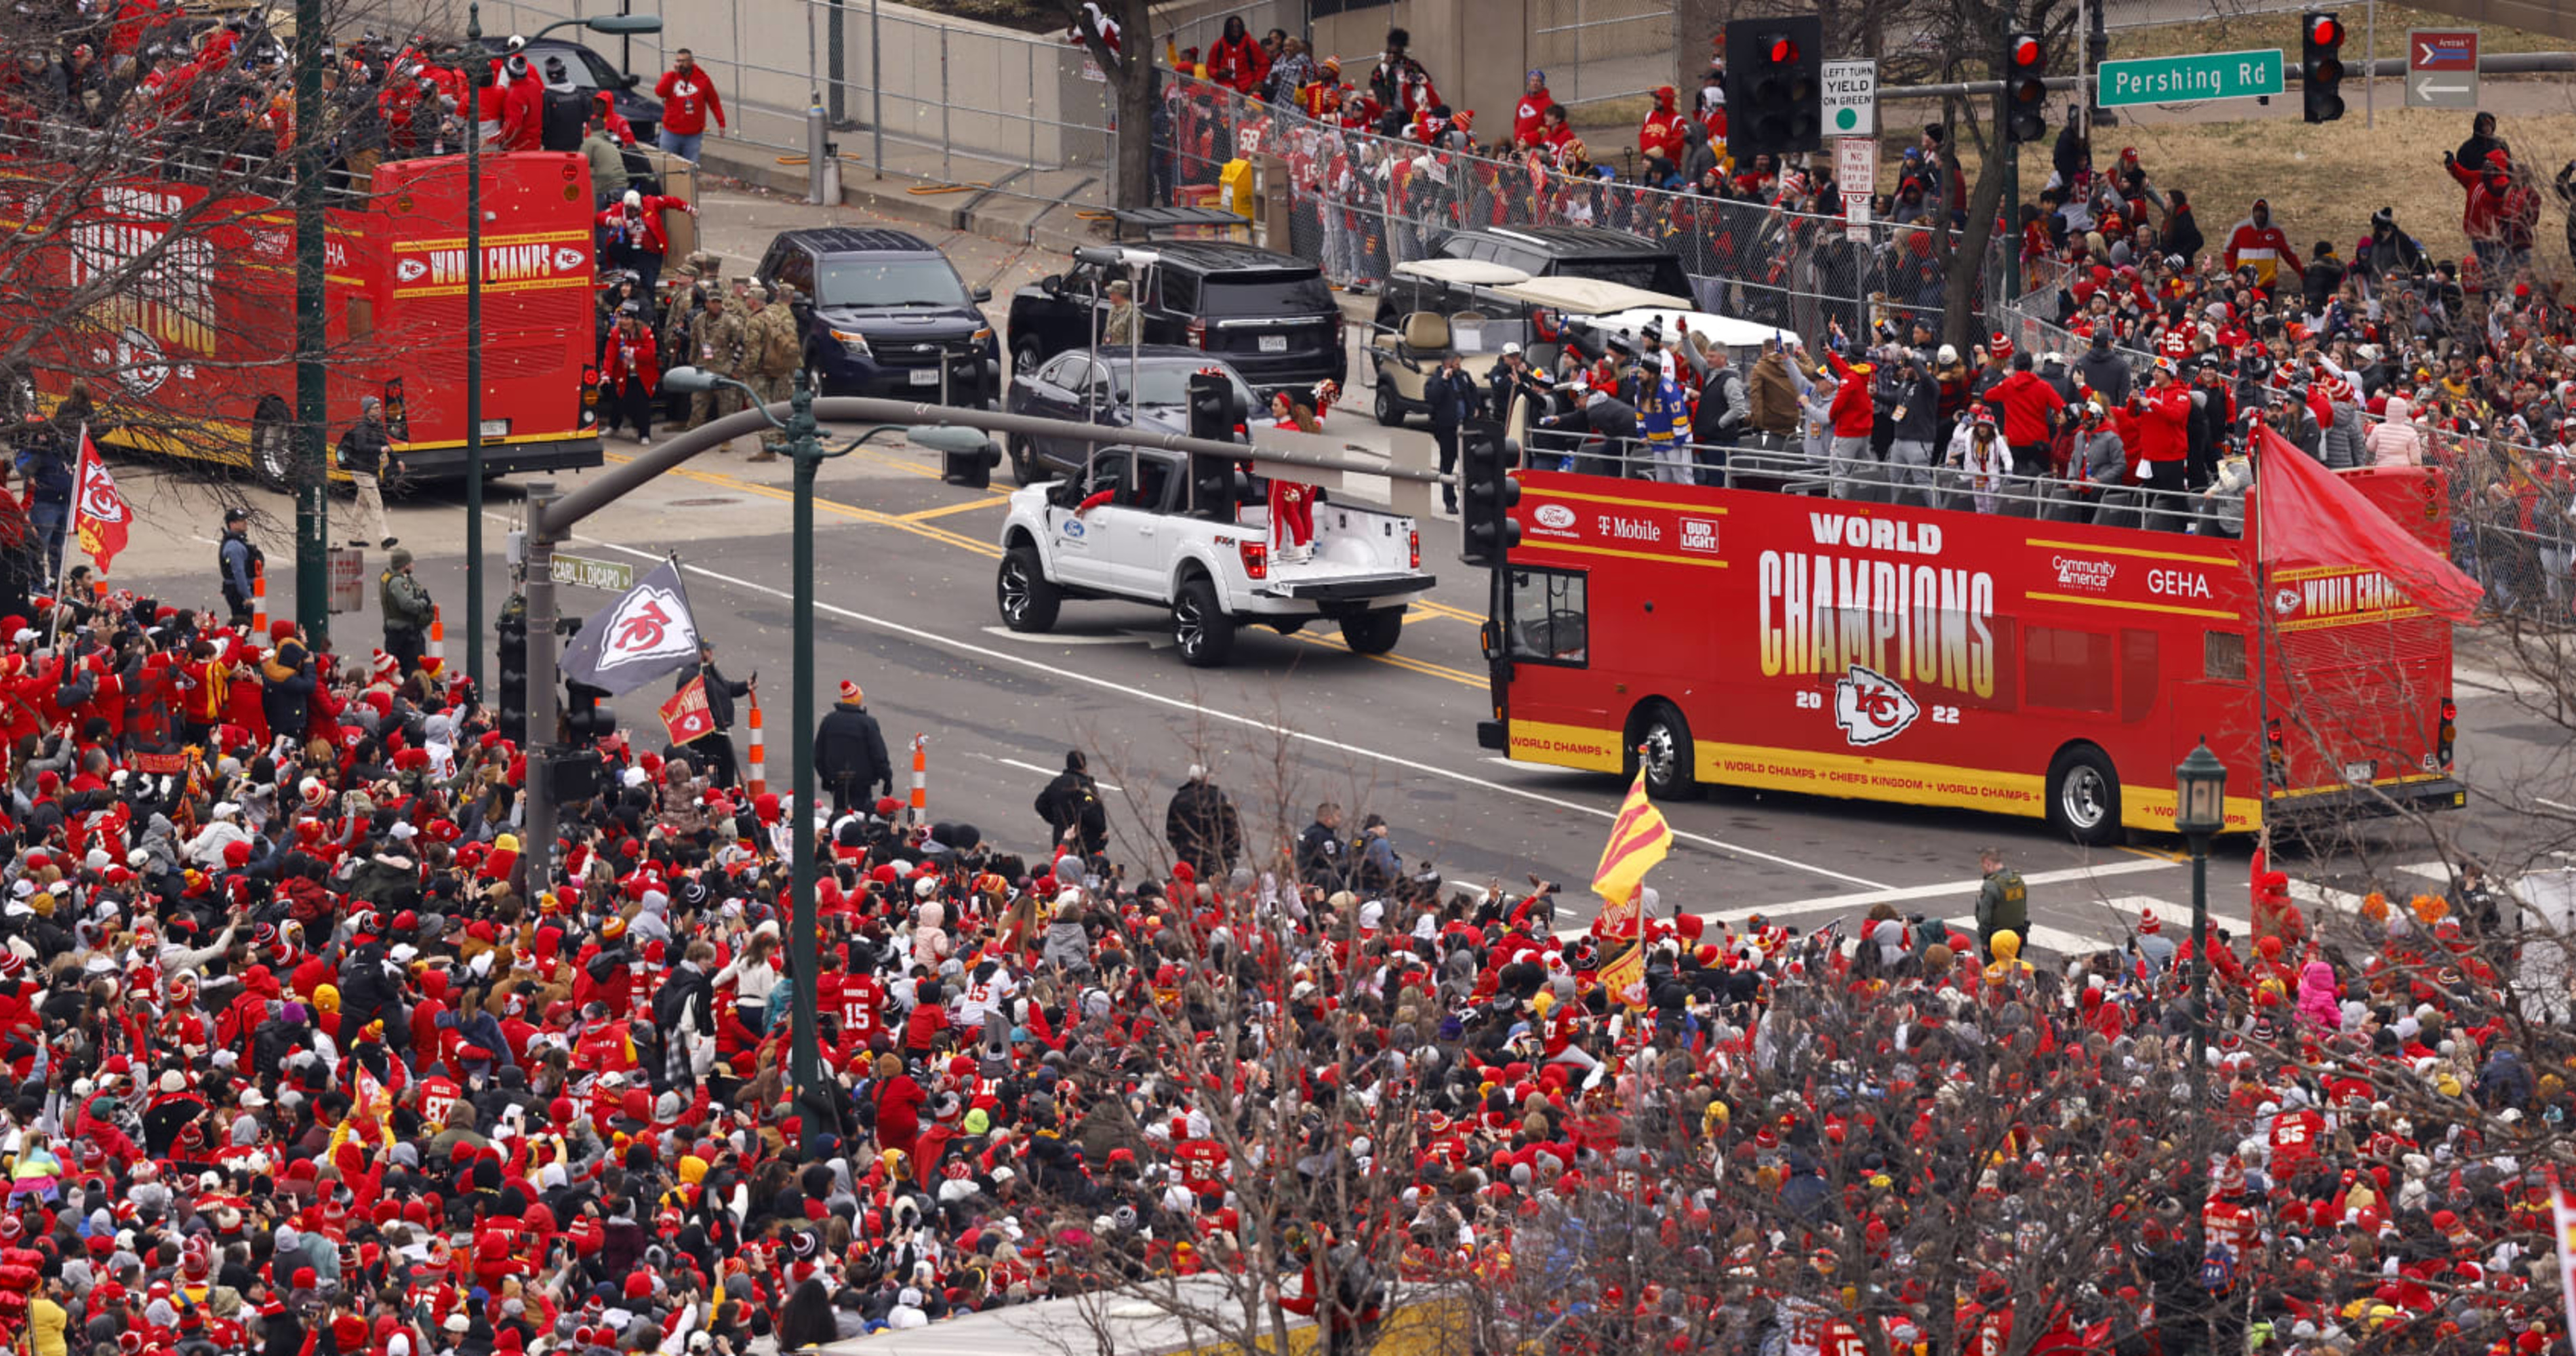 Chiefs tell parade patrons they plan to 'run it back' next year - ESPN